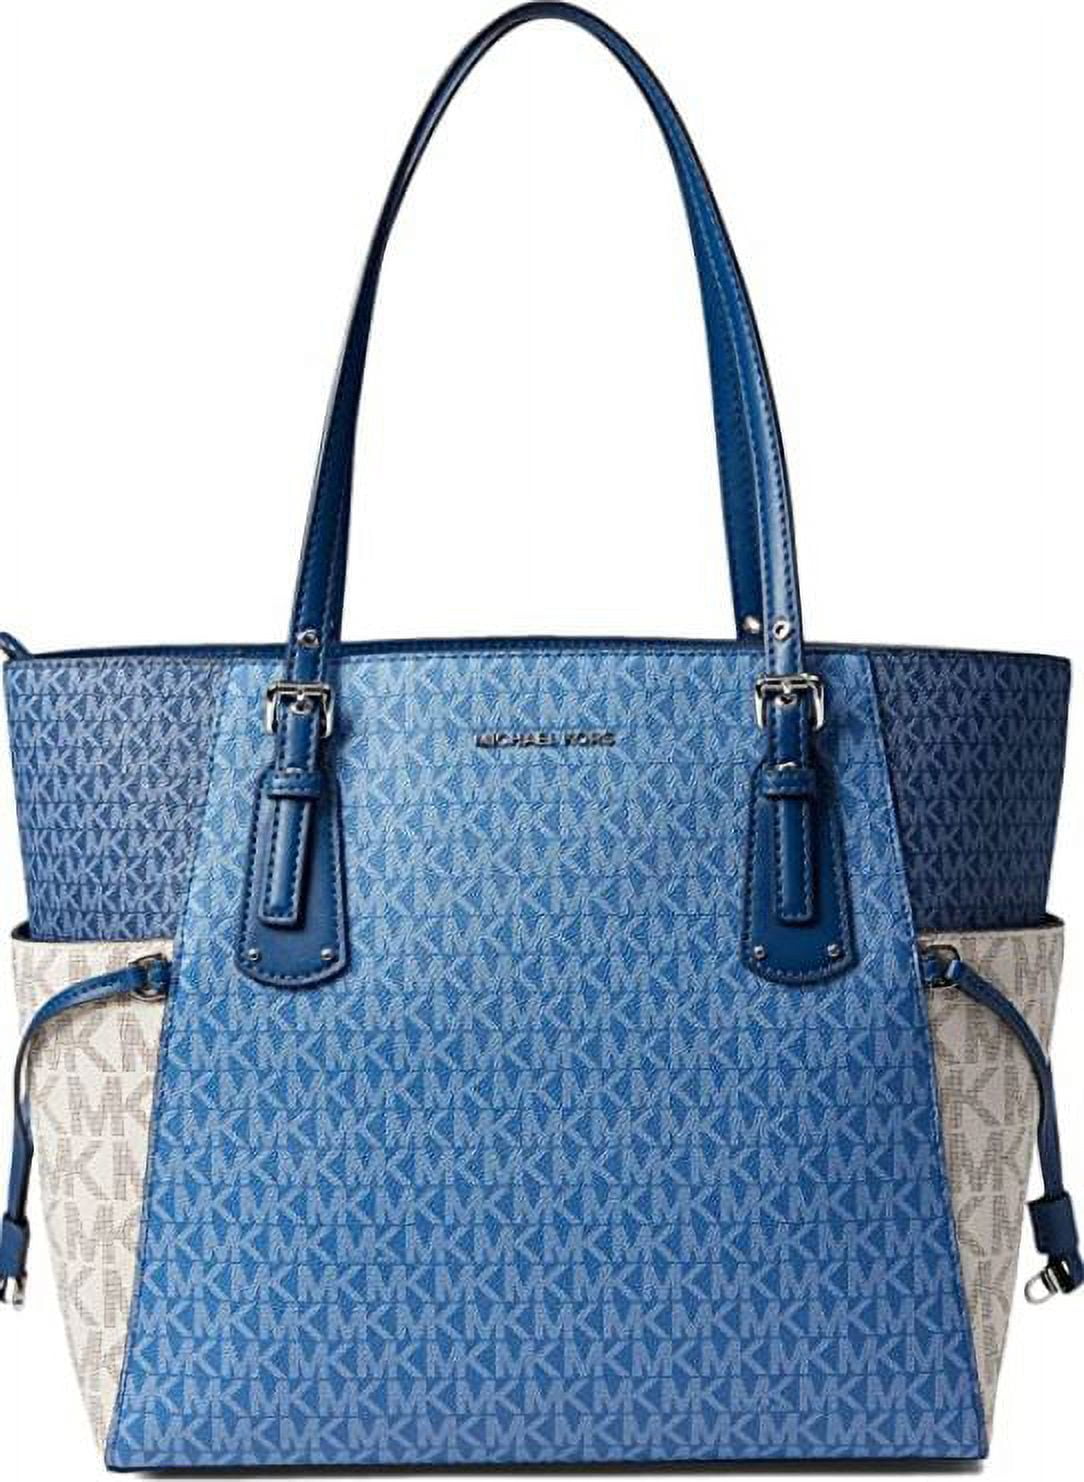 Michael Kors Blue Metallic And Saffiano Leather Voyager Tote Michael Kors